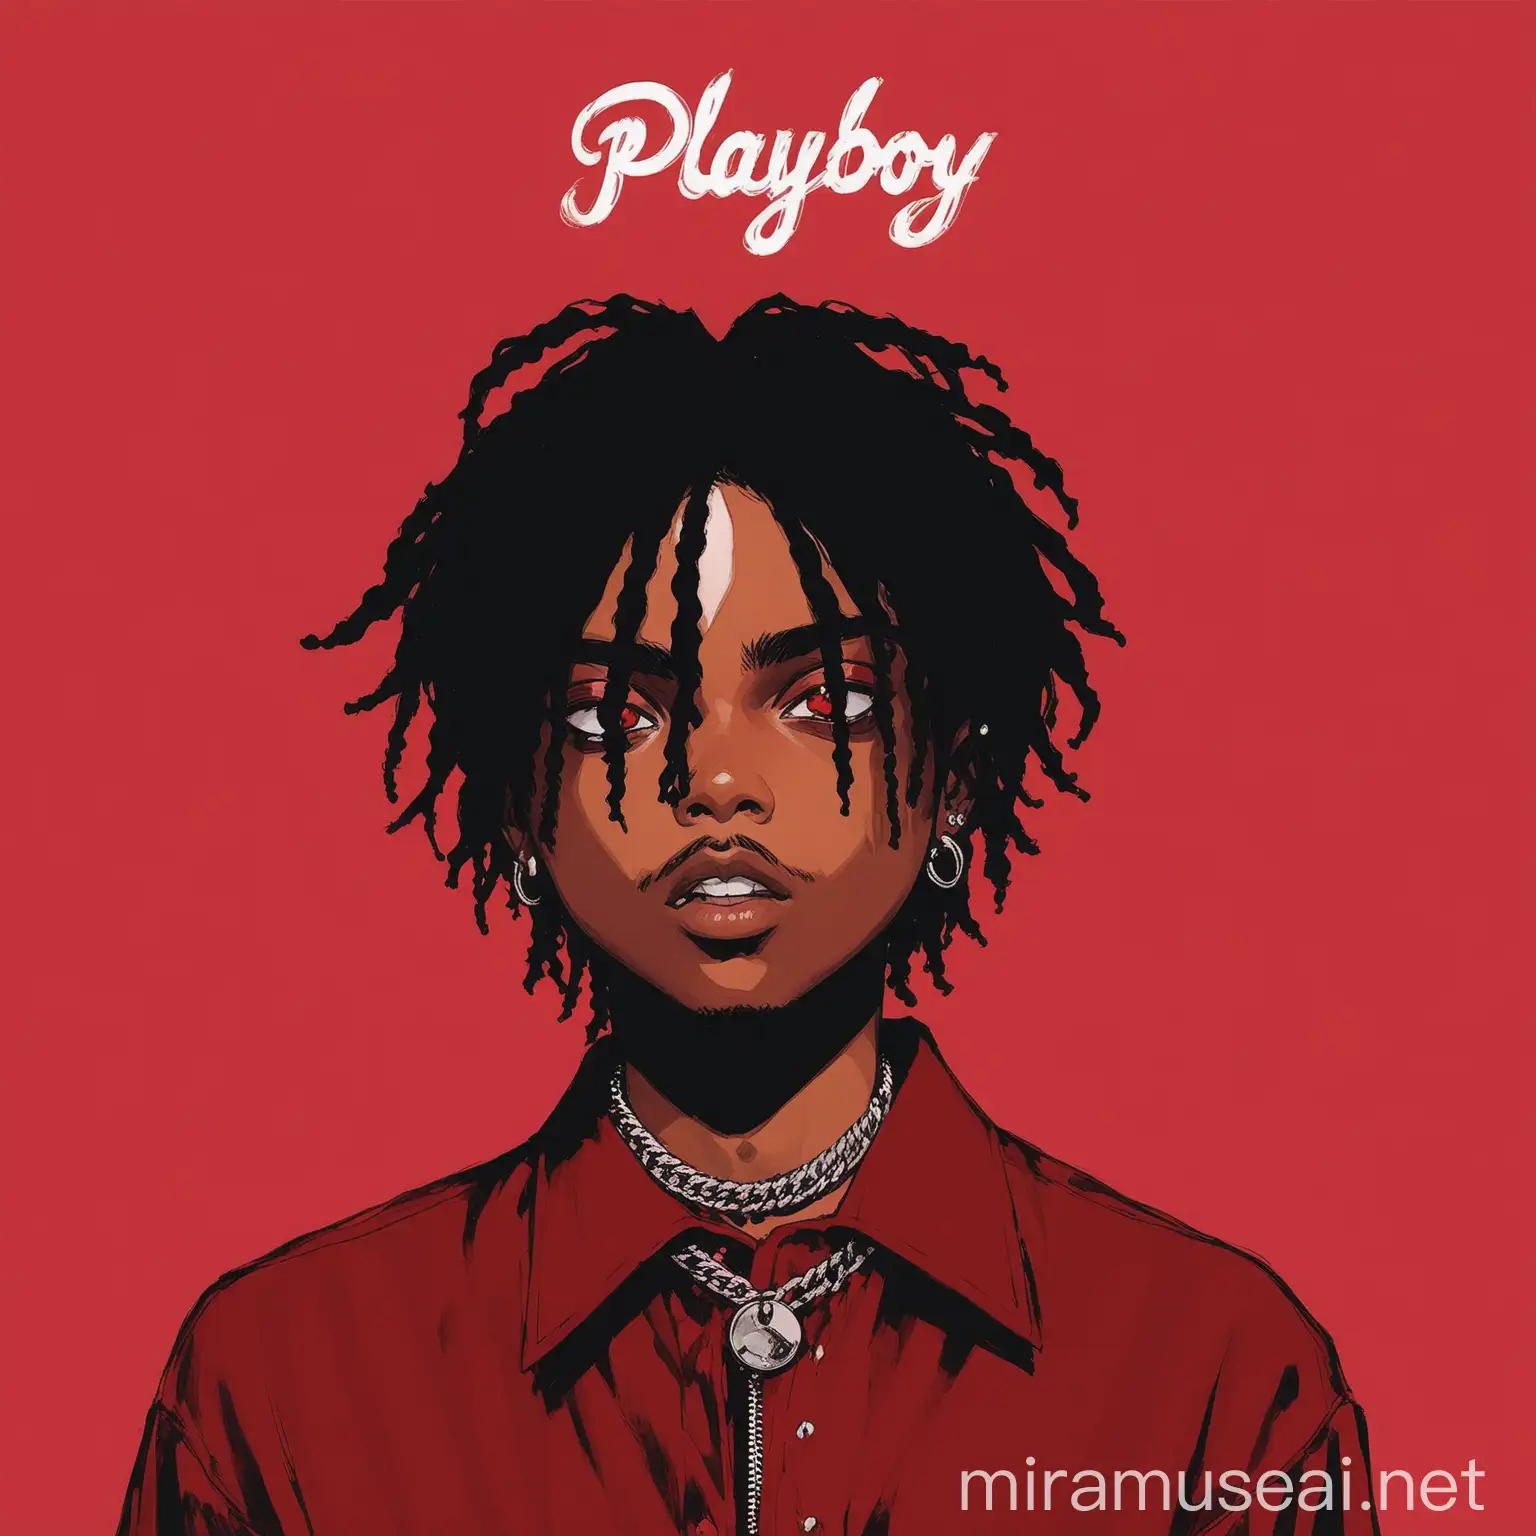 create album cover like WHOLE LOTTA RED by playboy carti, but with different face